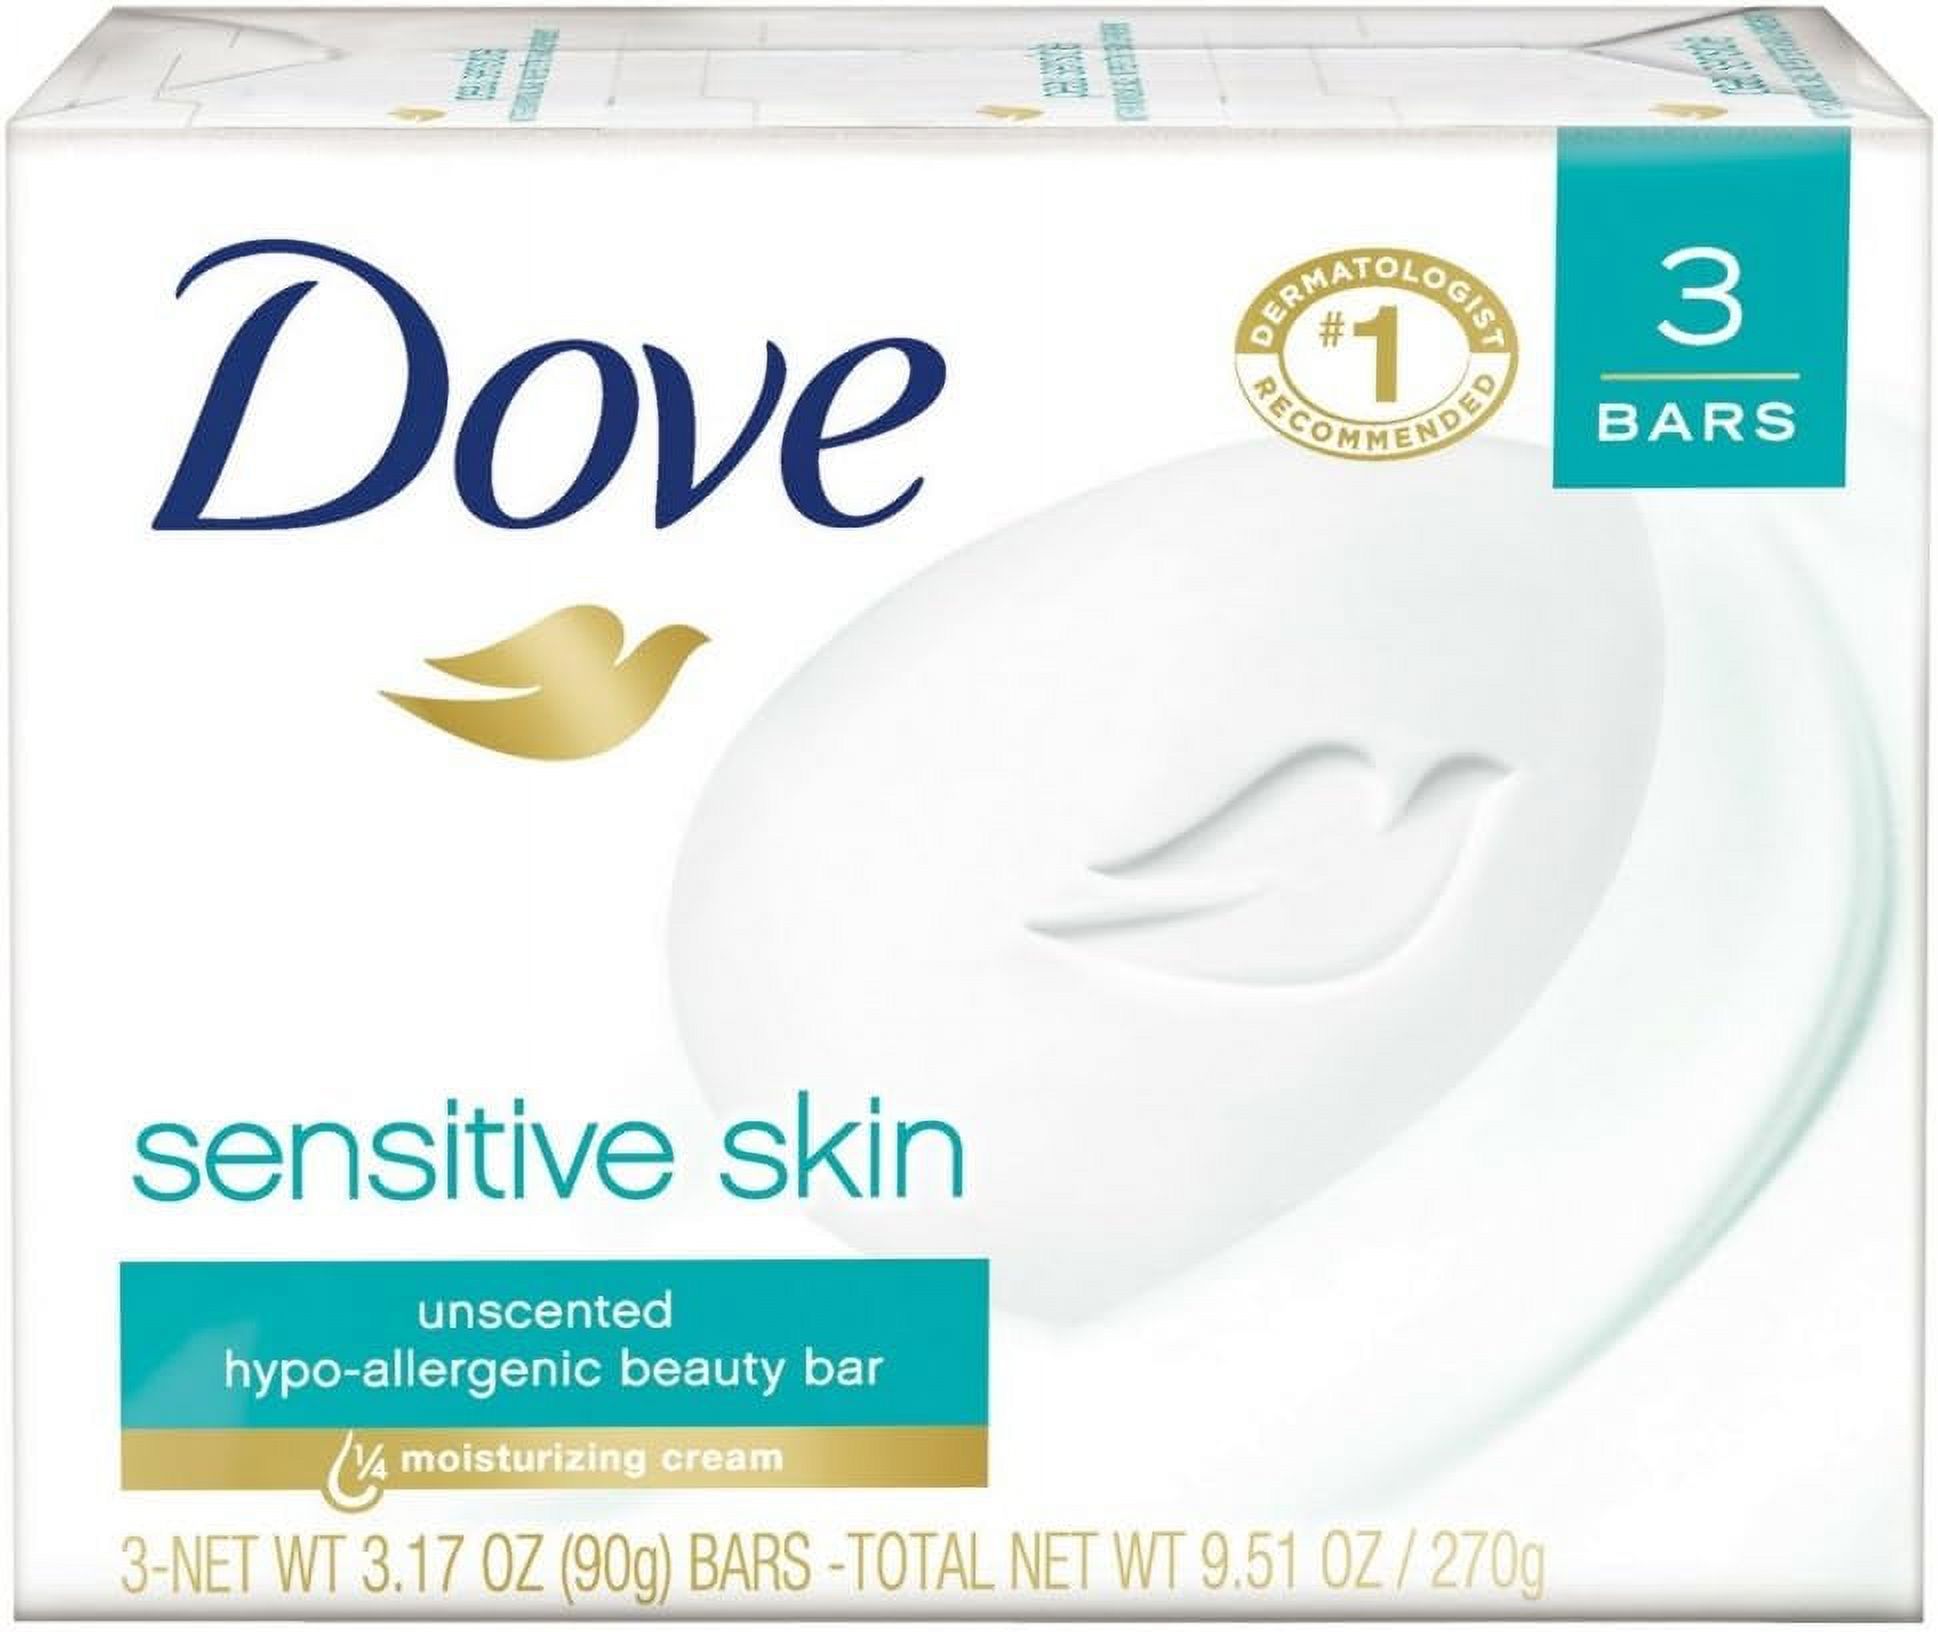 Dove Beauty Bar More Moisturizing Than Bar Soap Sensitive Skin With Gentle Cleanser for Softer Skin, Fragrance Free, Hypoallergenic 3.17 oz, 3 Bars - image 1 of 2